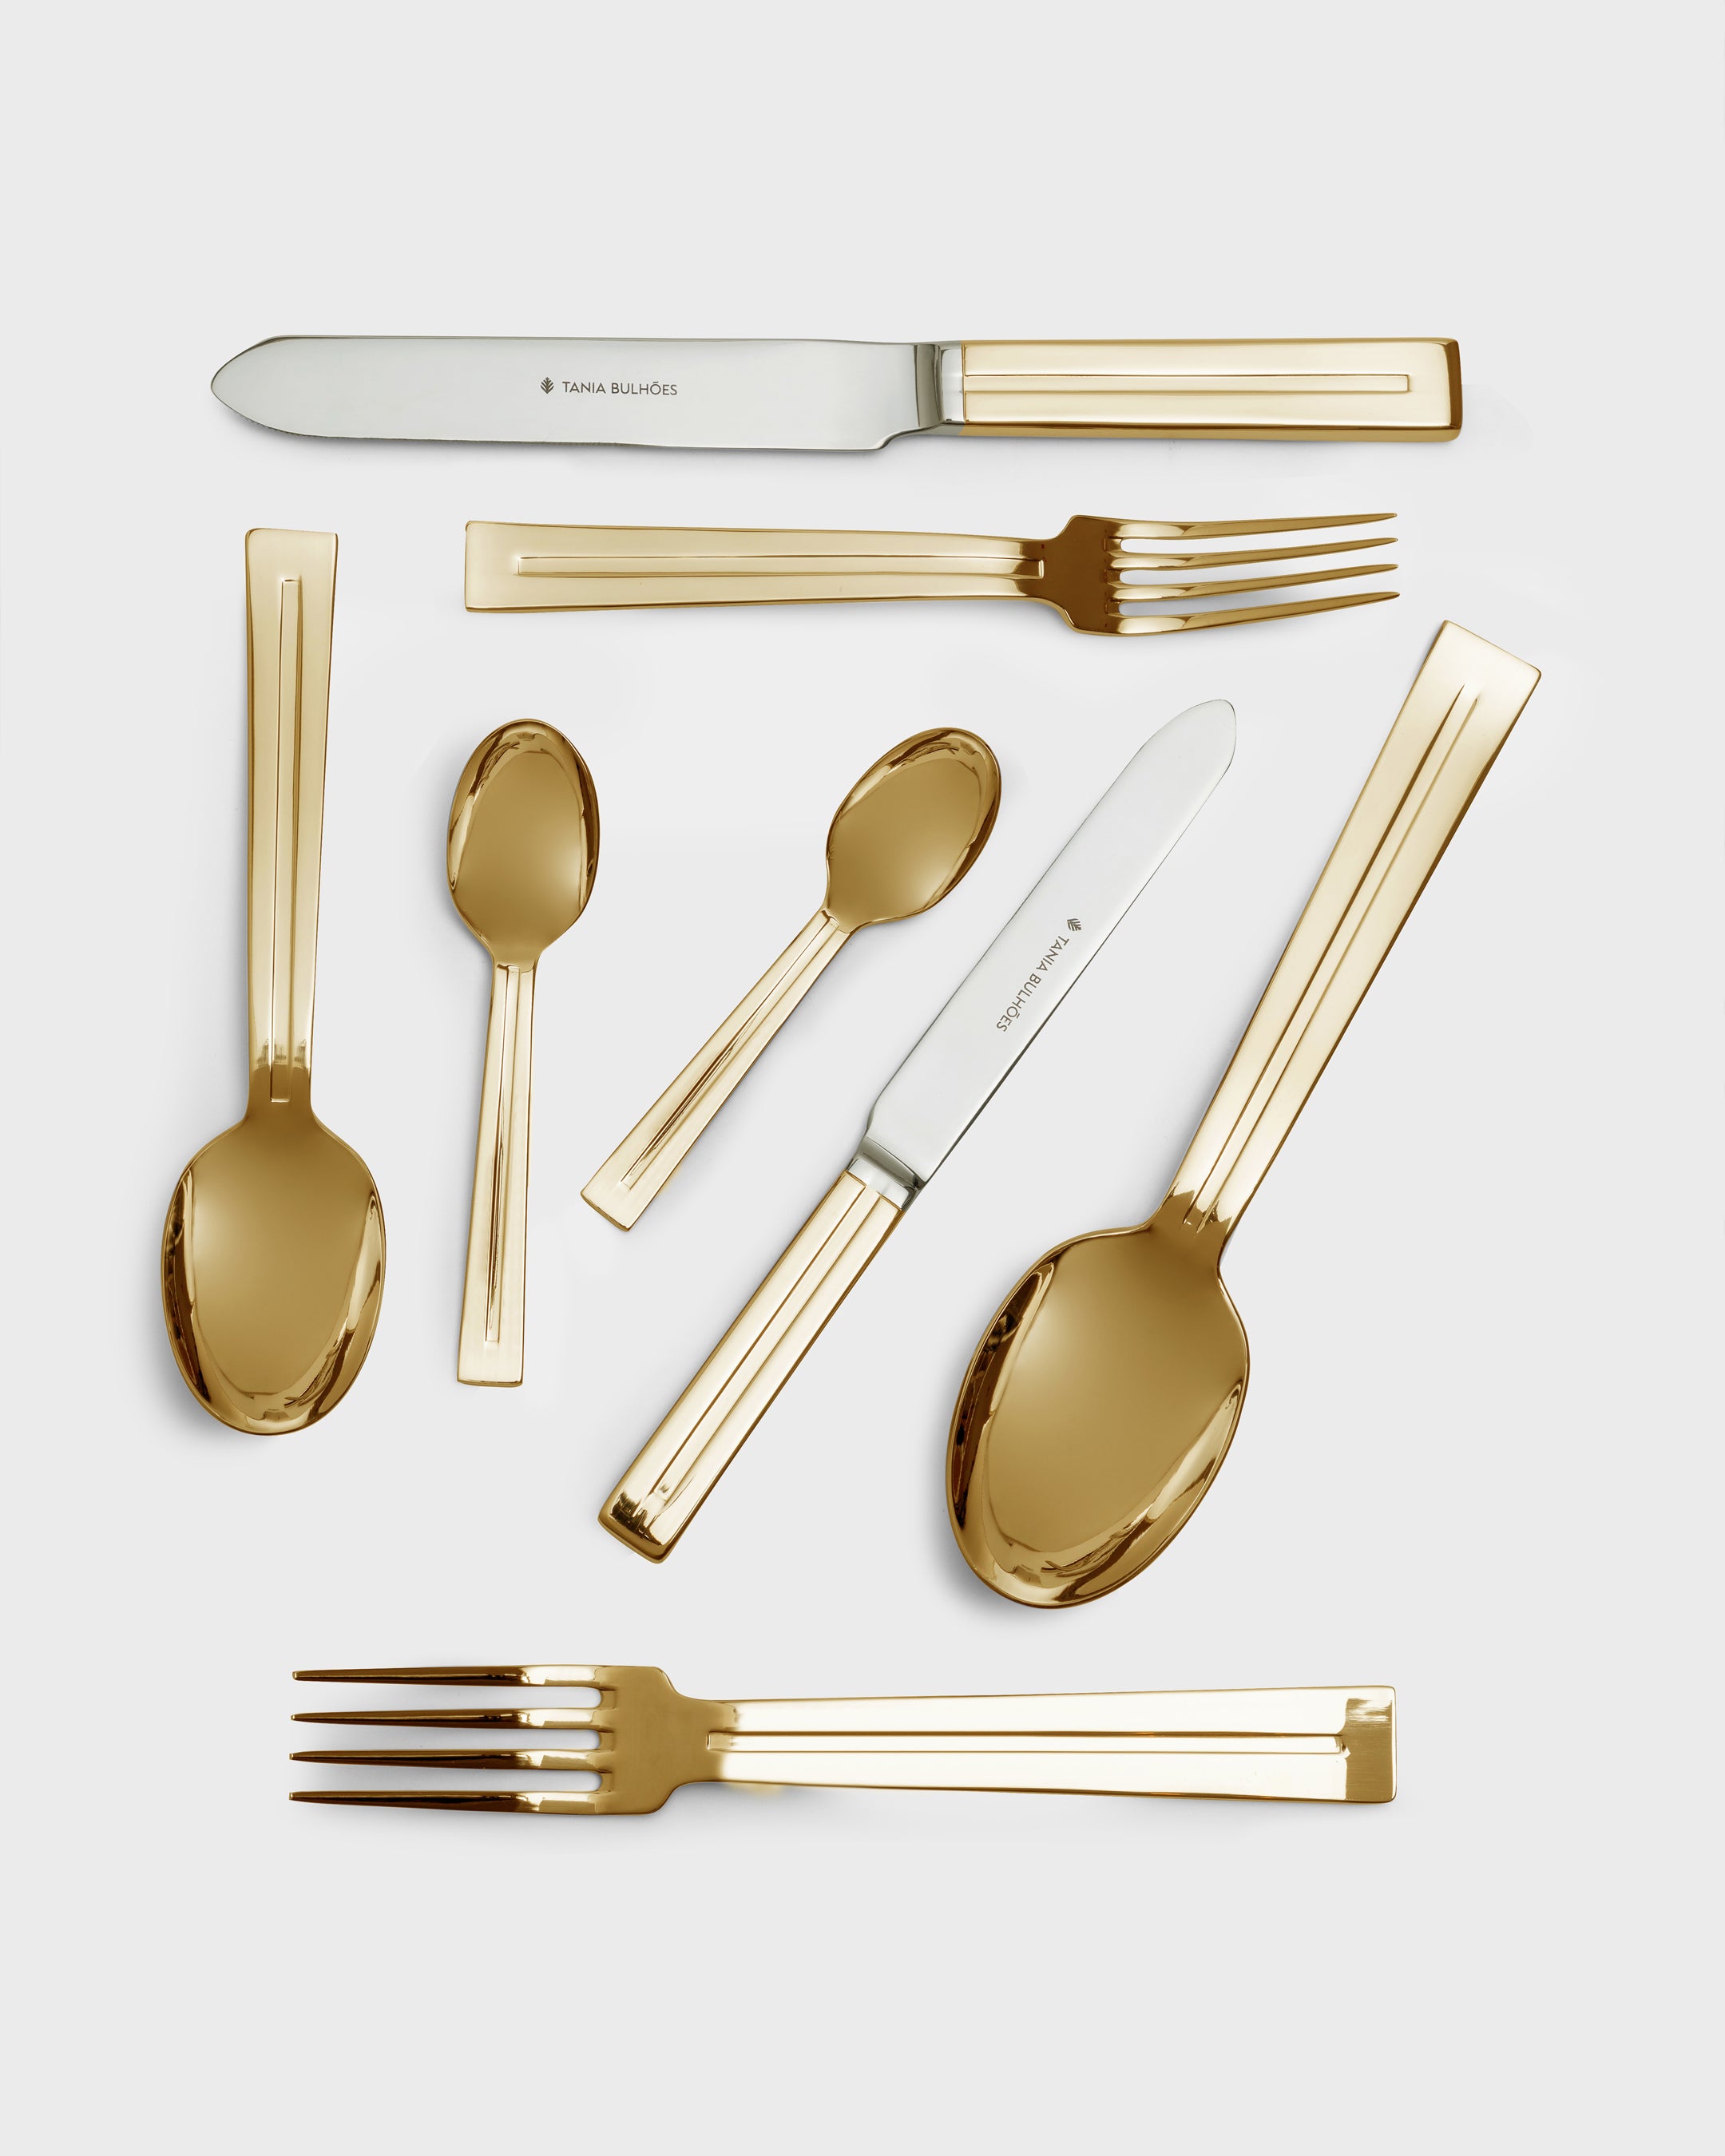 Flatware Metropole Gold-Plated Stainless Steel (8) - Tania Bulhões